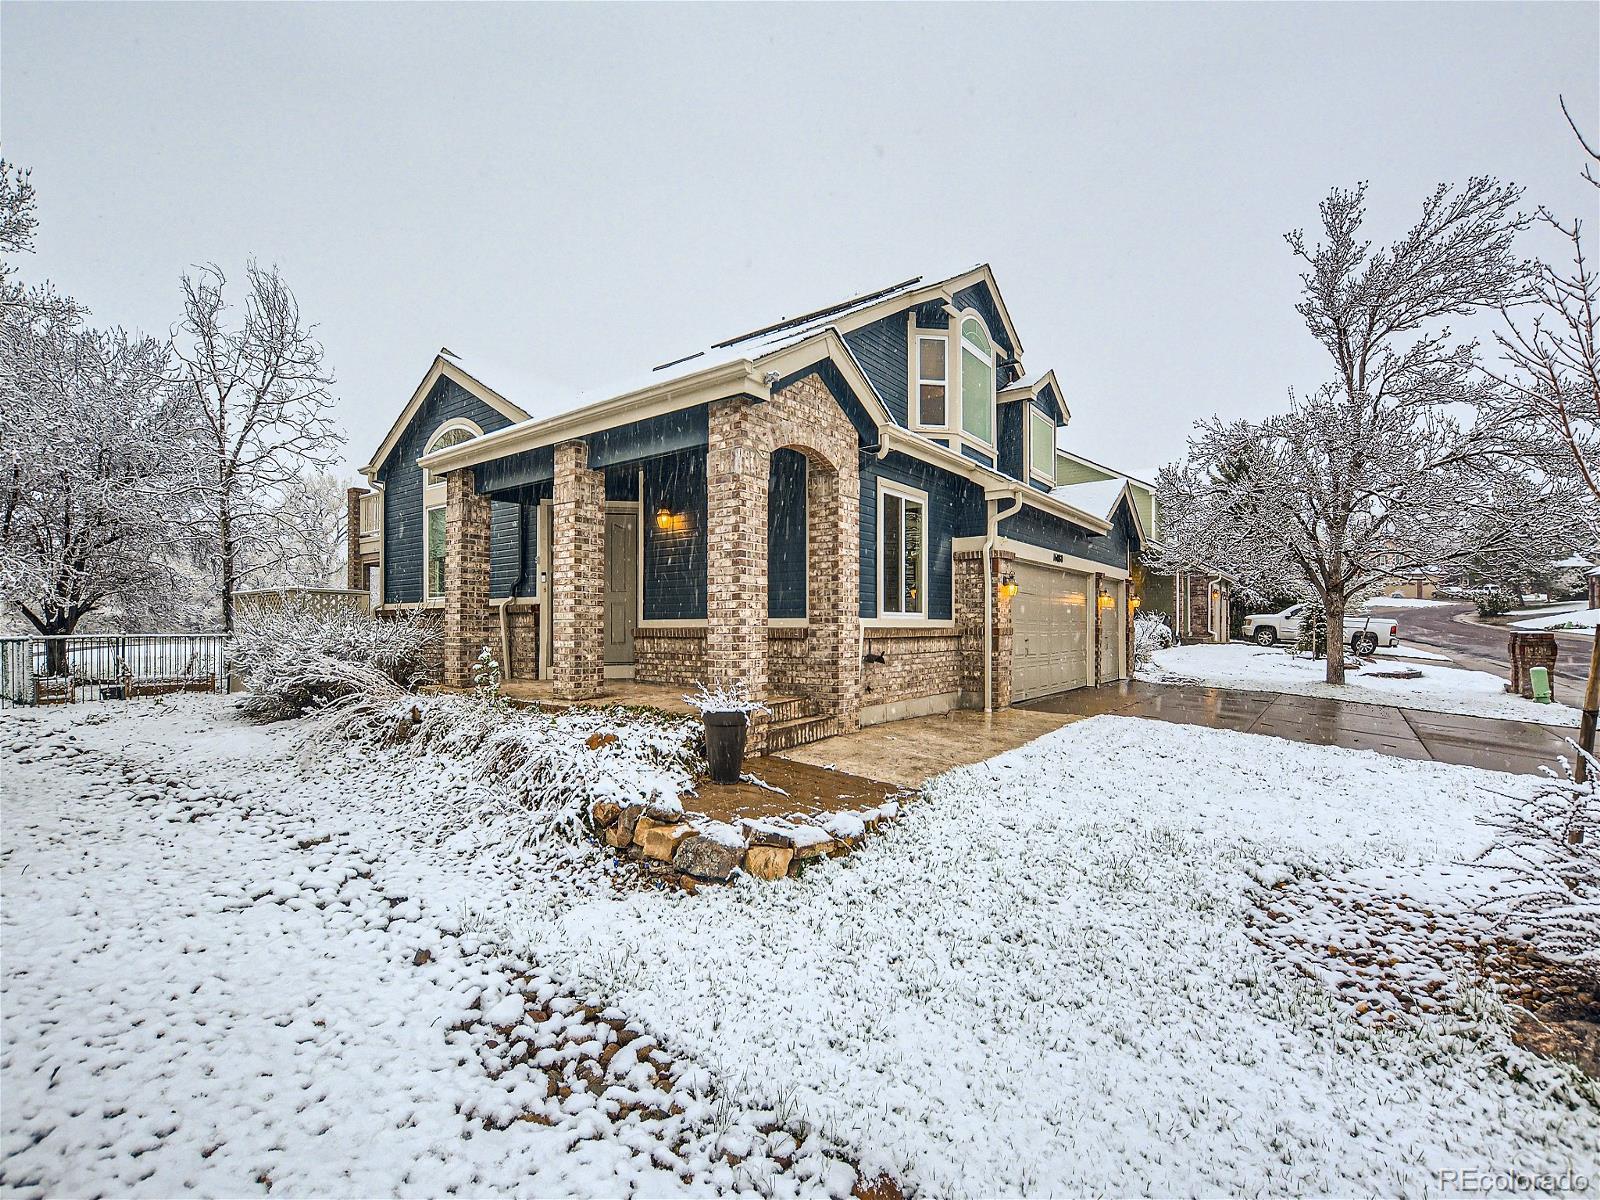 16080 w 69th place, arvada sold home. Closed on 2024-05-07 for $900,000.